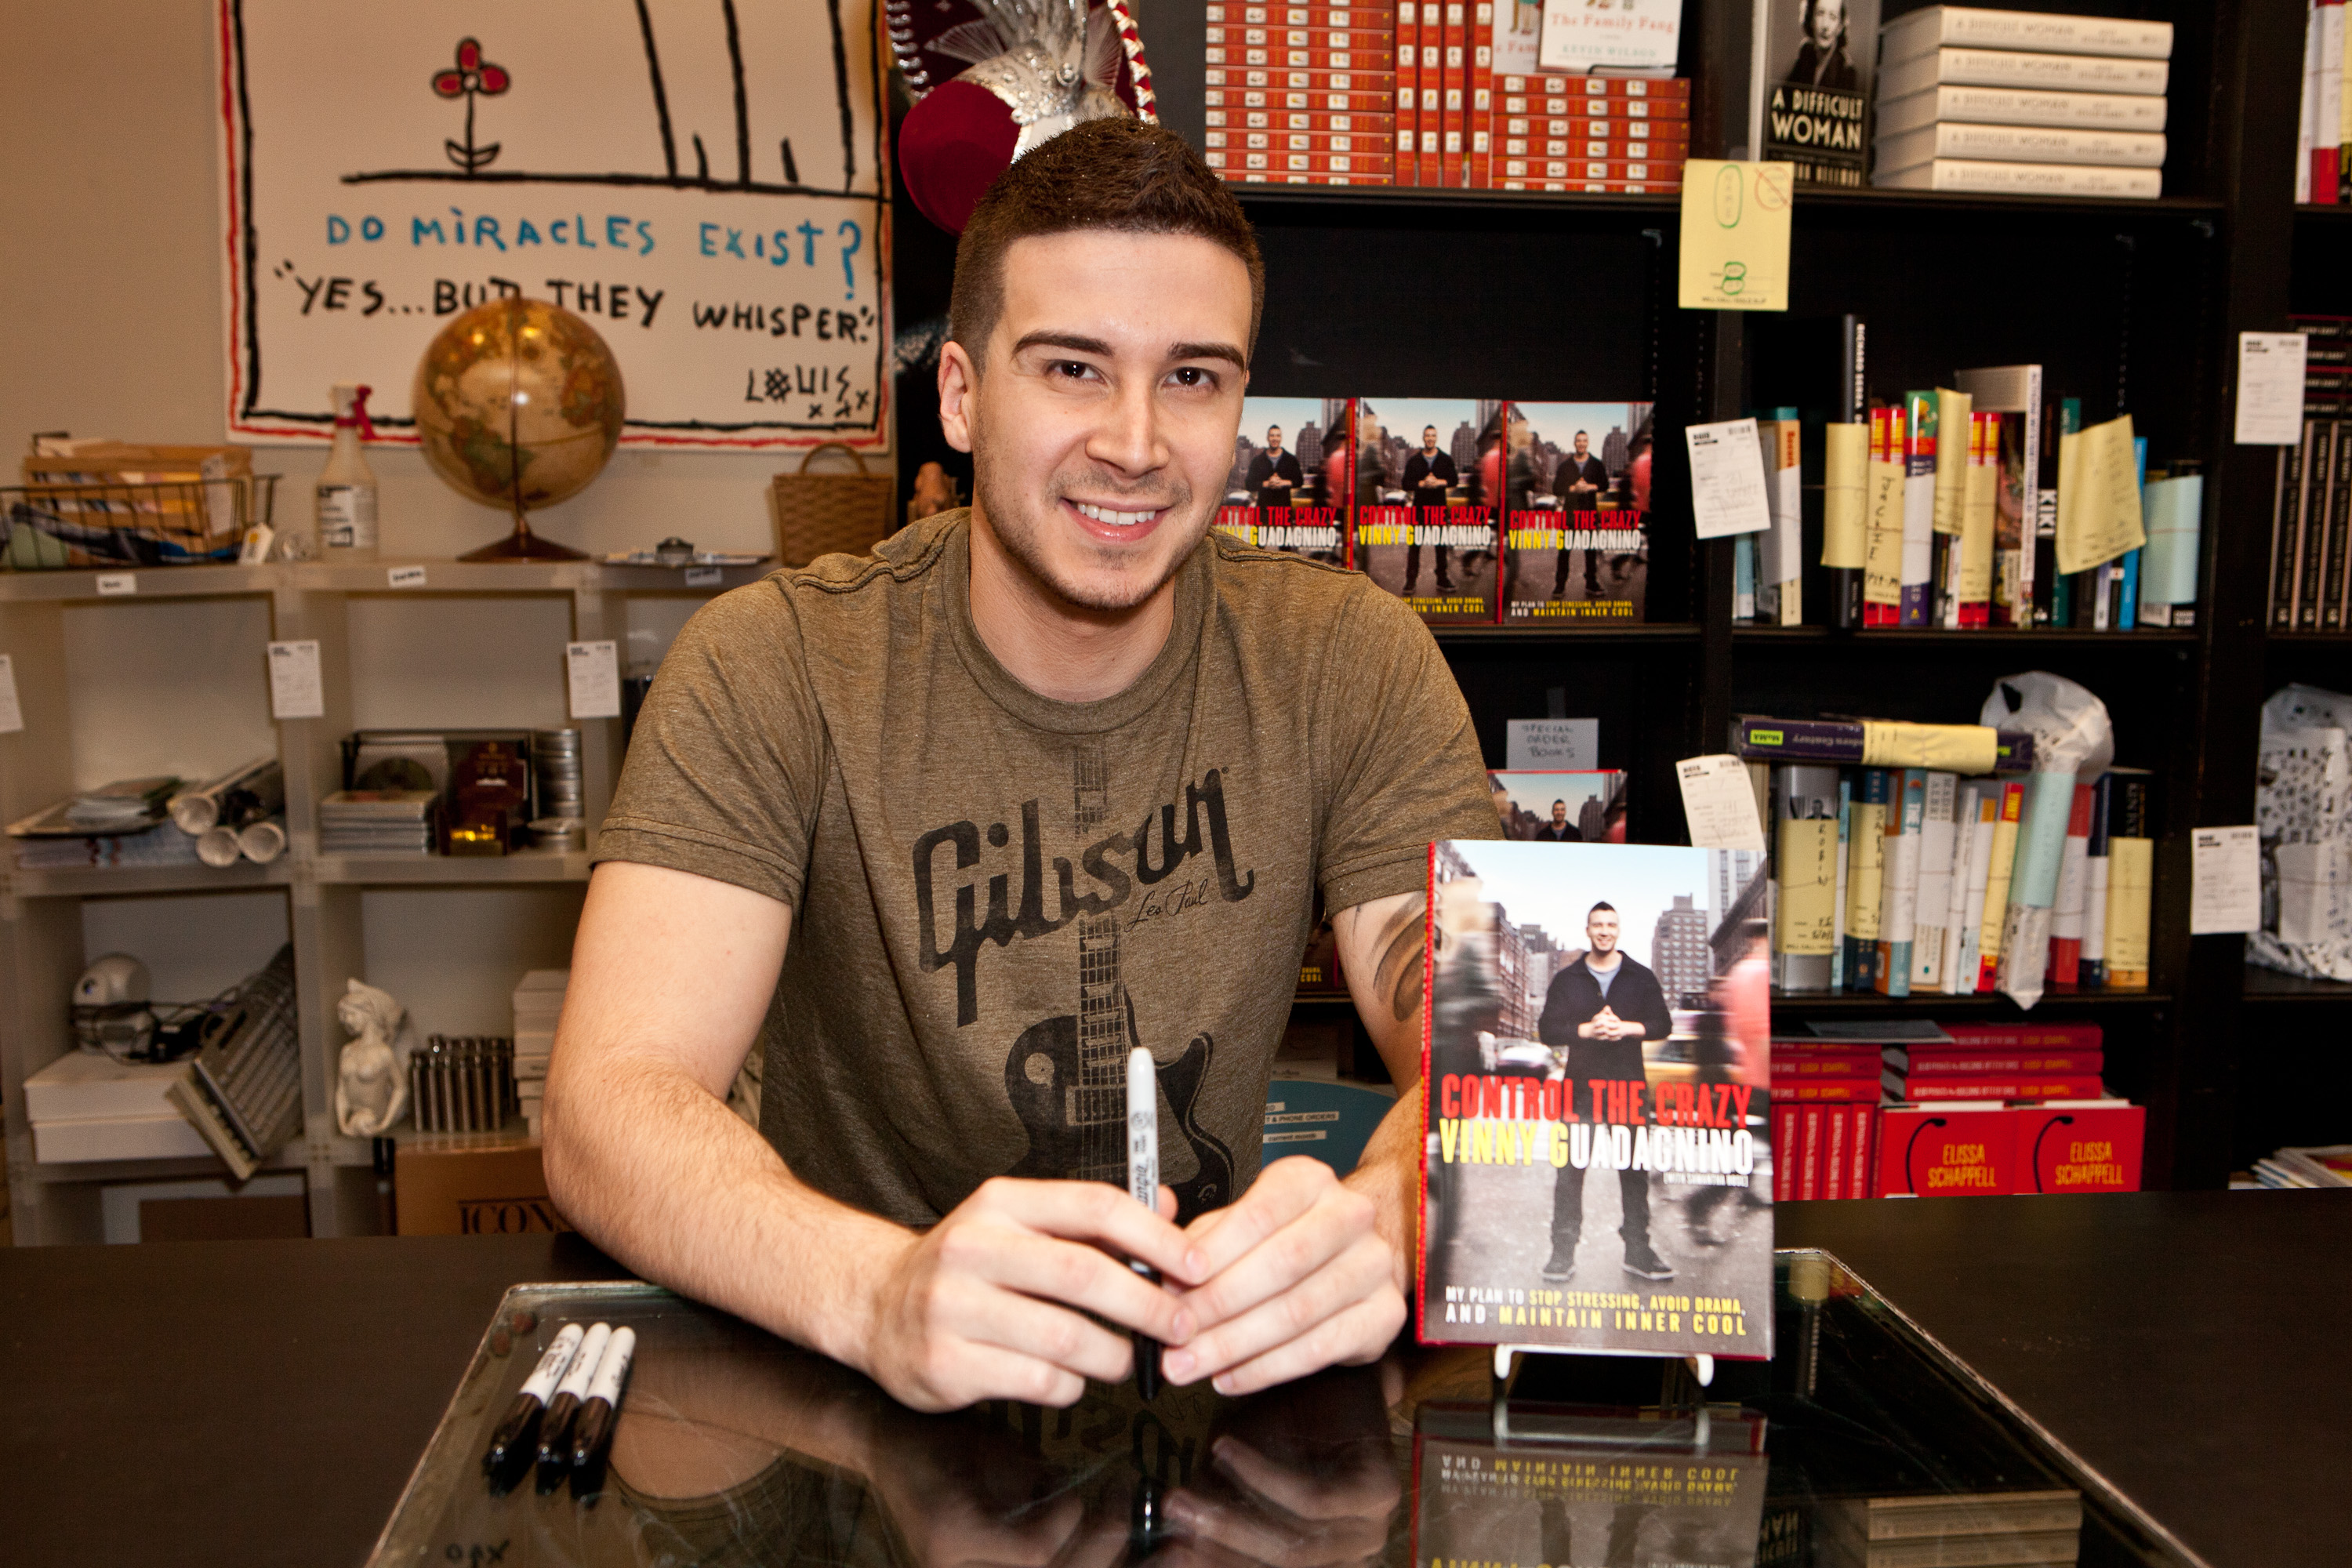 Television personality Vinny Guadagnino signs copies of his new book 'Control the Crazy' in 2012